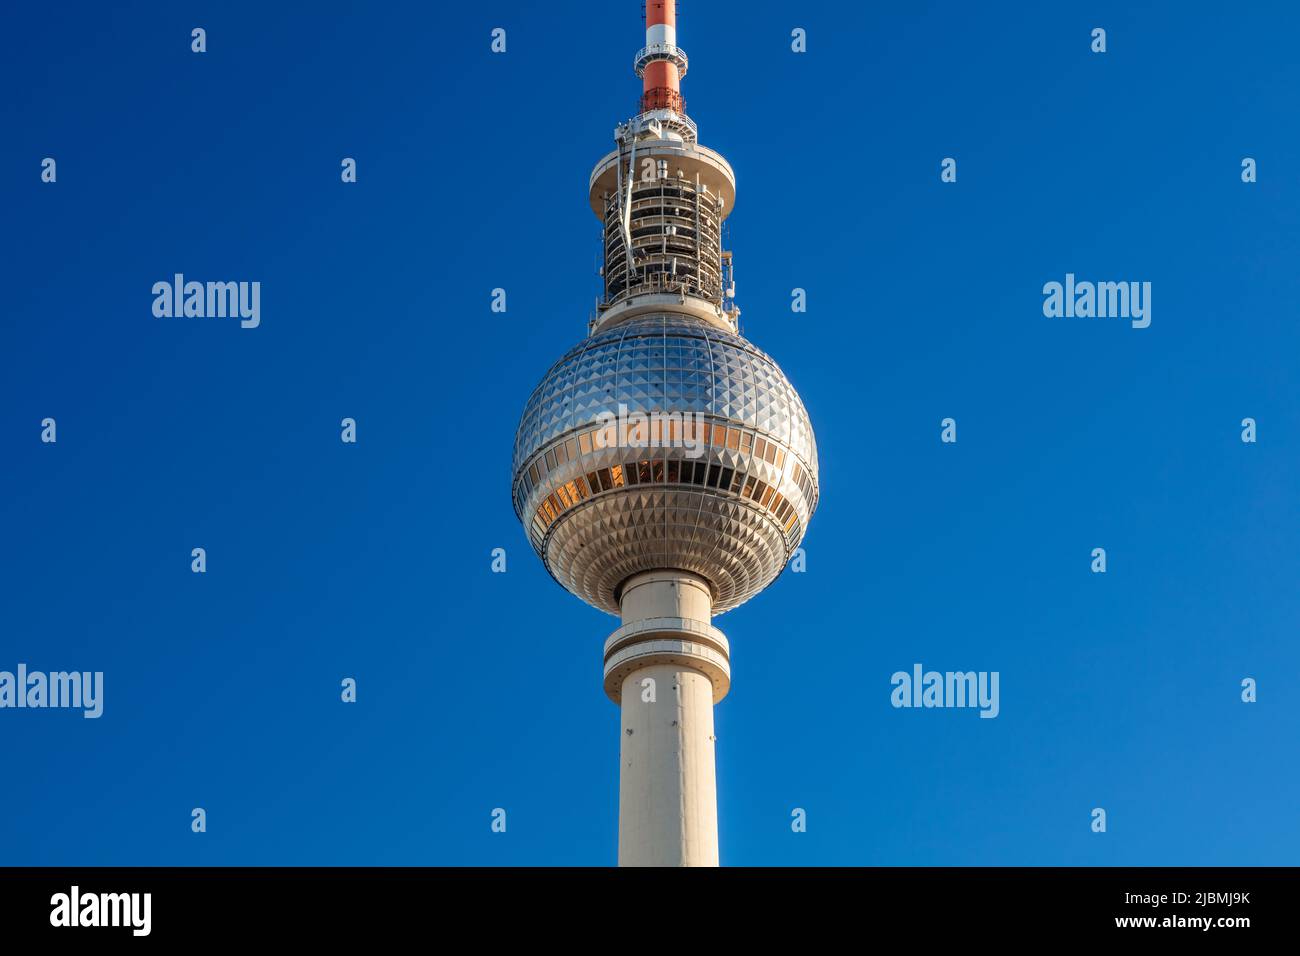 Close up of the Berlin Television Tower, Berliner Fernsehturm against a blue sky, Berlin, Germany Stock Photo